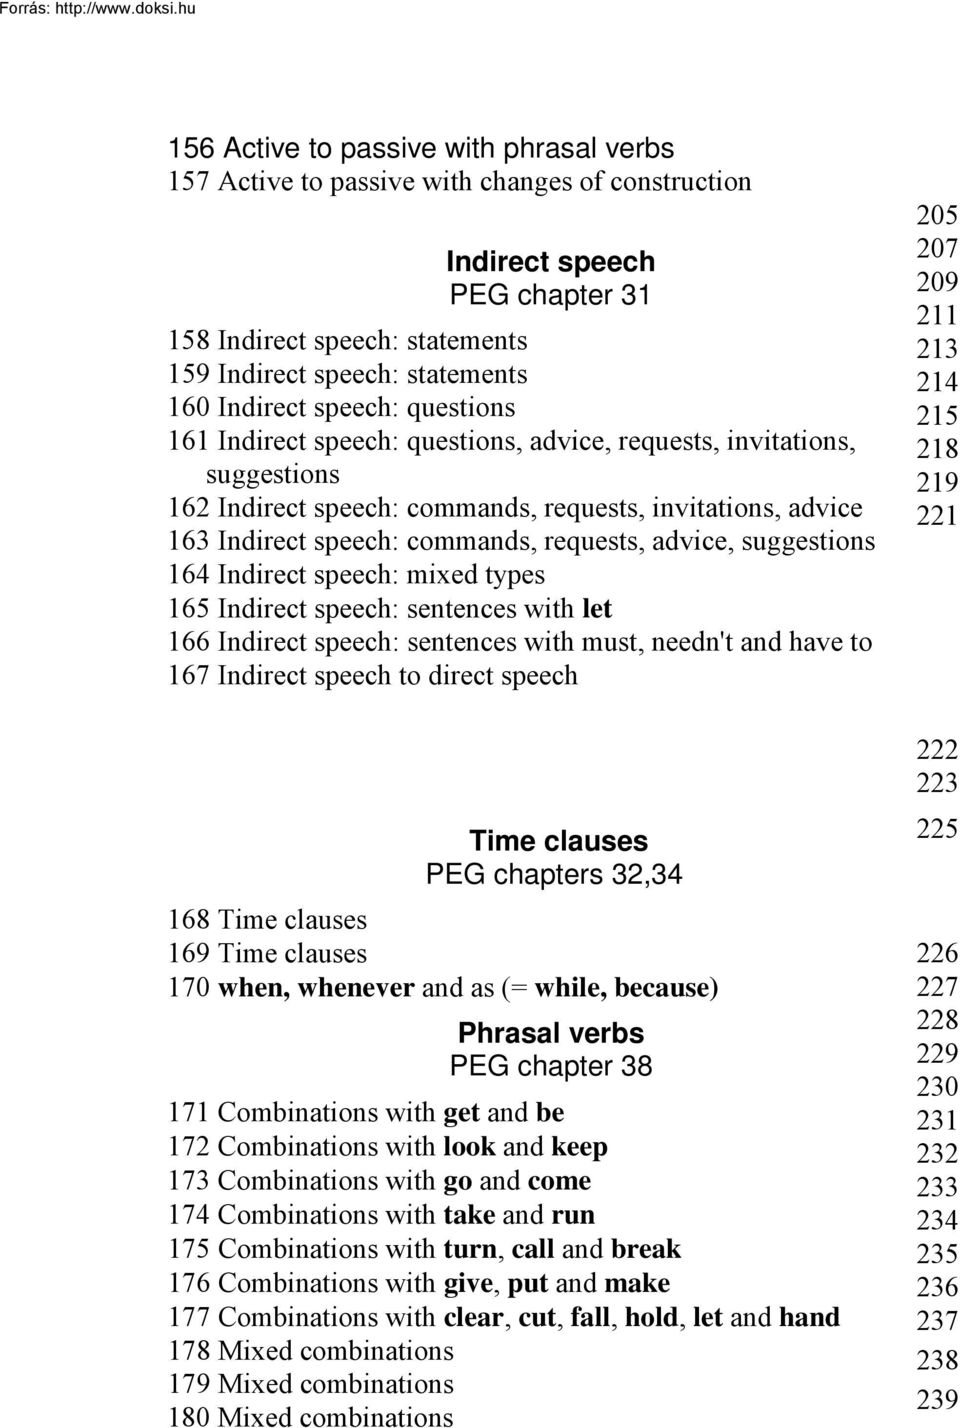 advice, suggestions 164 Indirect speech: mixed types 165 Indirect speech: sentences with let 166 Indirect speech: sentences with must, needn't and have to 167 Indirect speech to direct speech Time